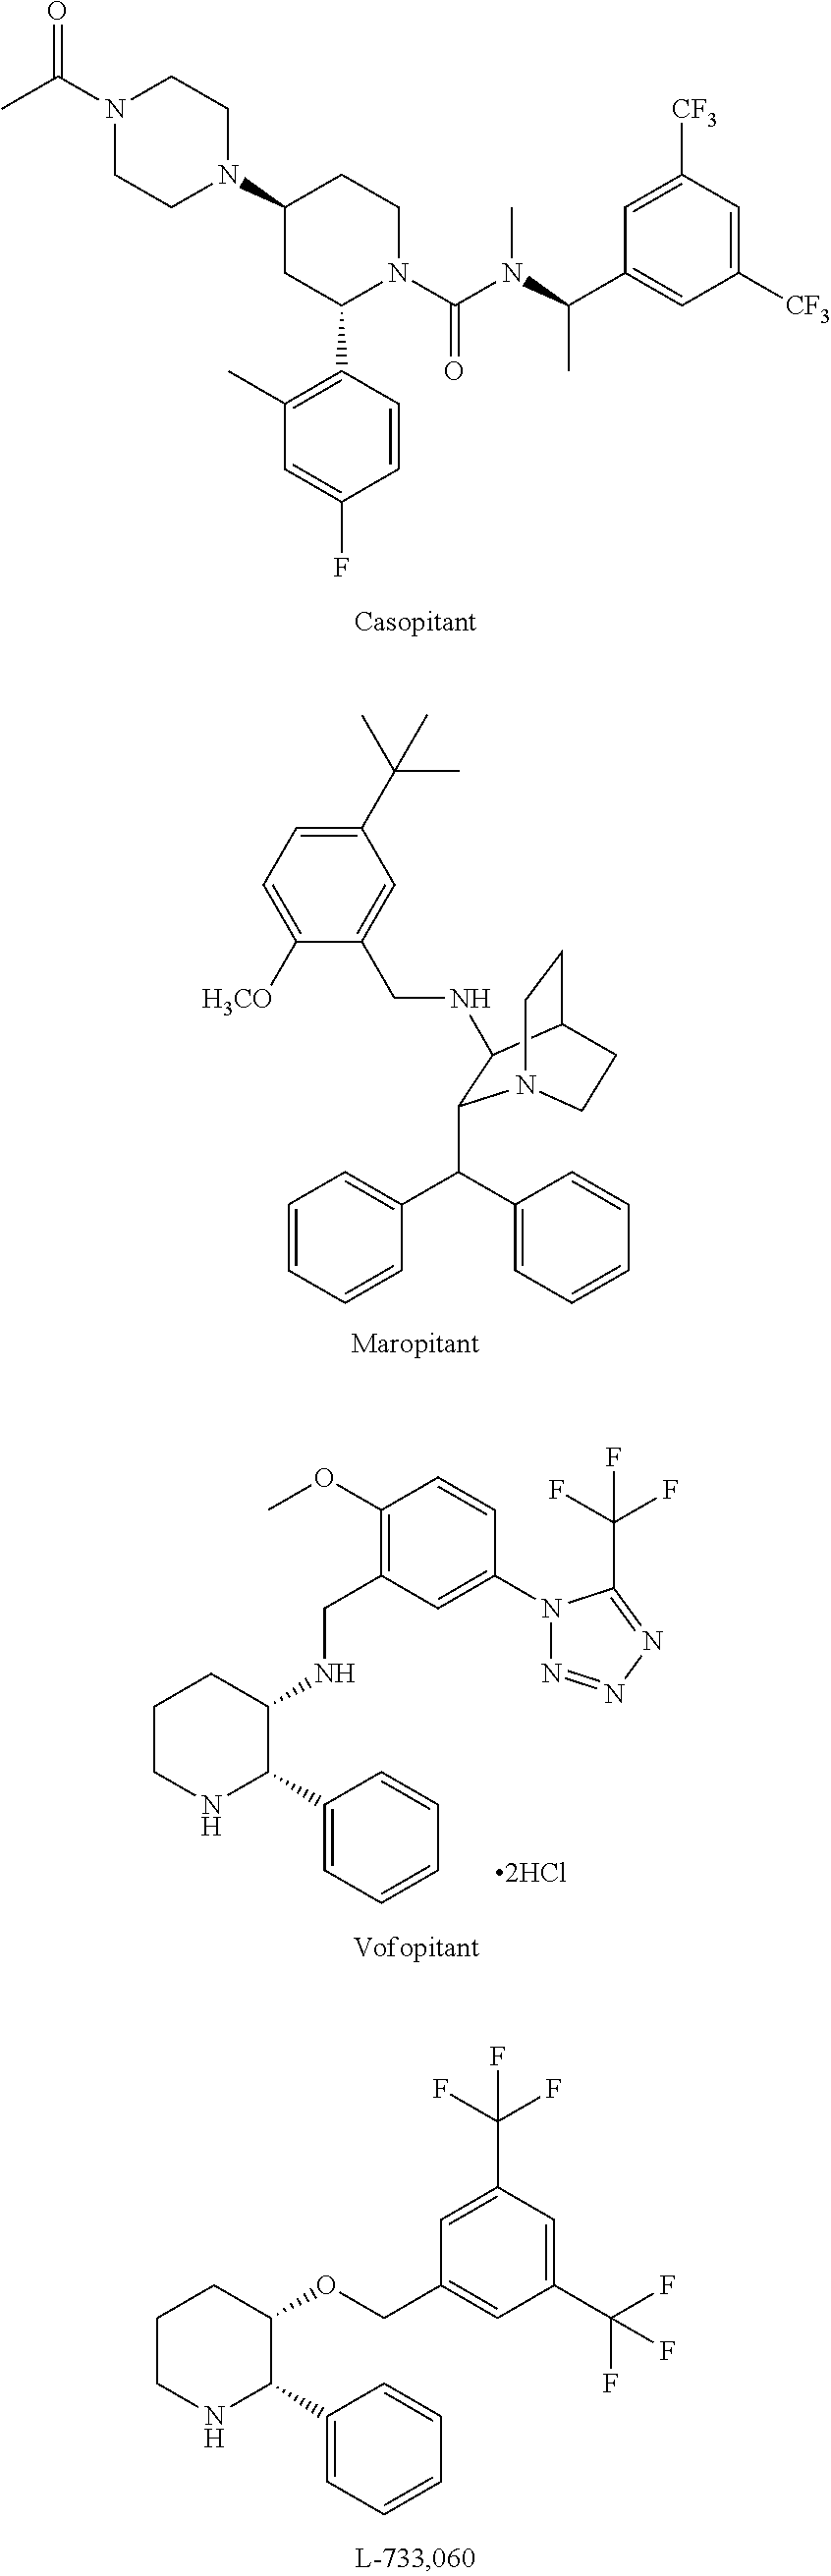 Neurokinin-1 receptor antagonist composition for treatment of diseases and conditions of the respiratory tract